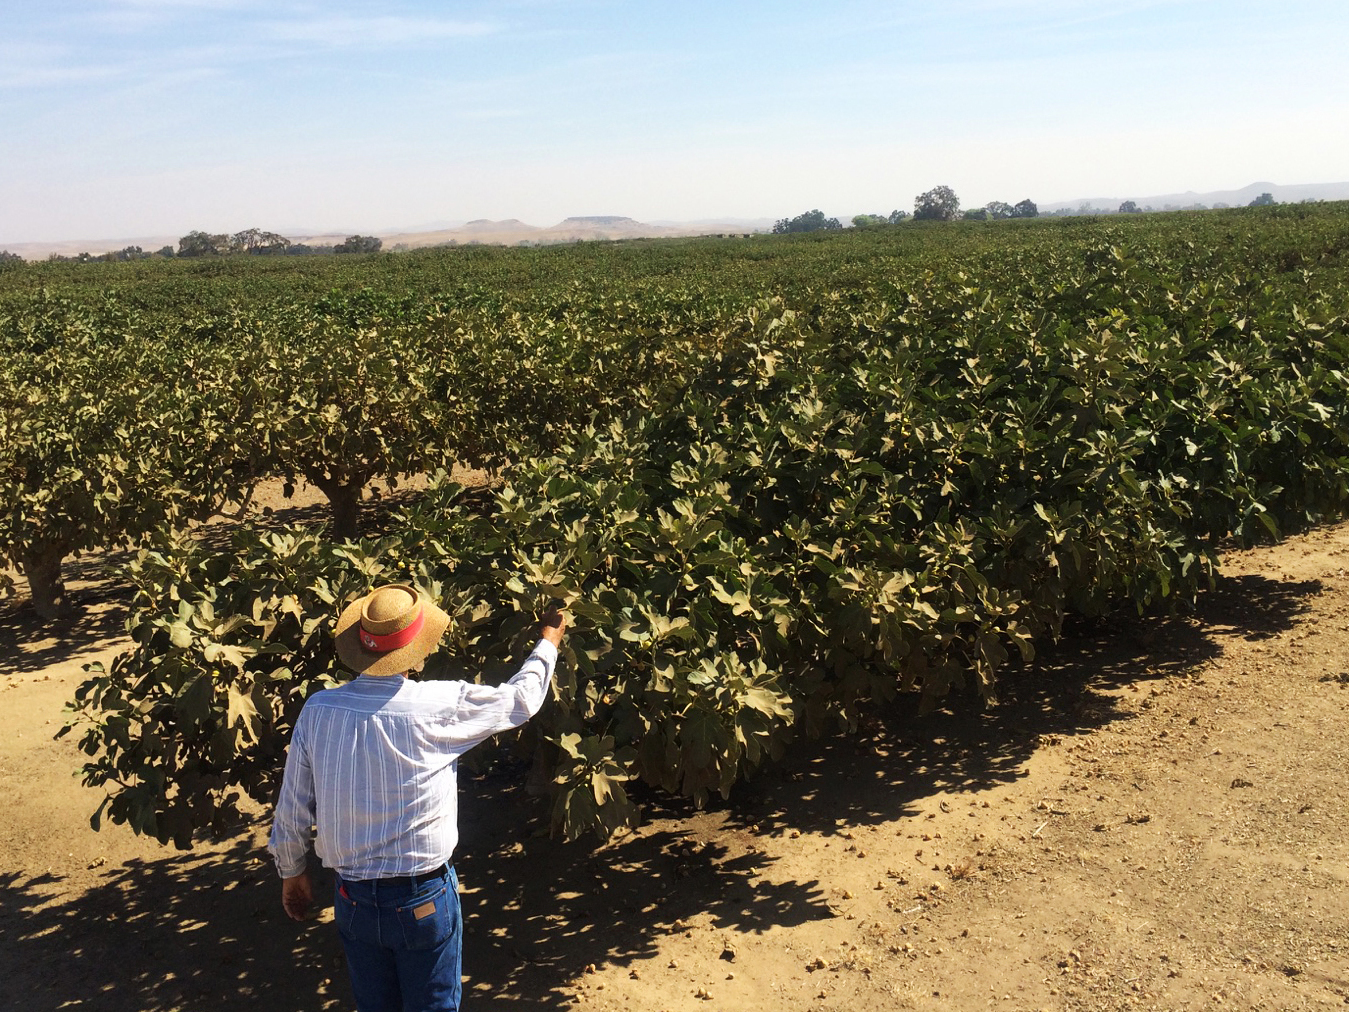 Paul Mesple is a fig farmer near the Central Valley town of Chowchilla, Calif. He and his partner farm around 2,000 acres of figs.